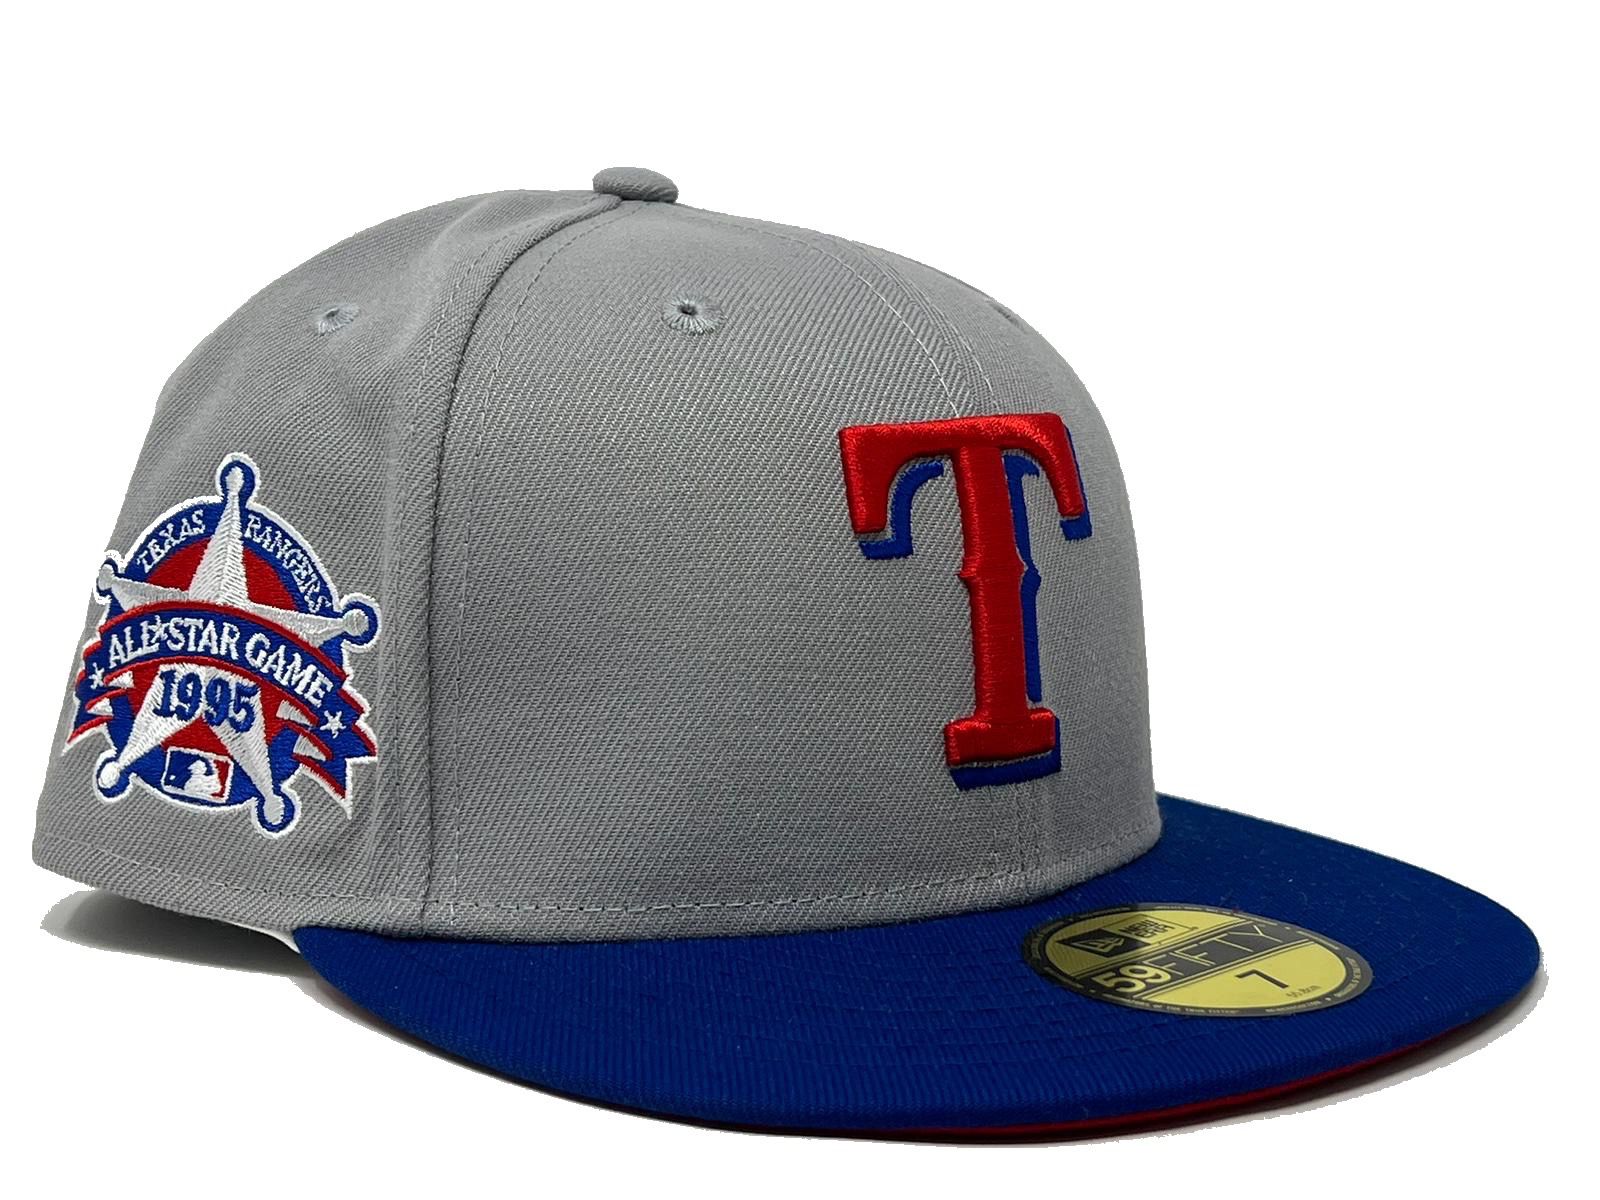 TEXAS RANGERS 1995 ALL STAR GAME INFRARED PINK BRIM NEW ERA FITTED HAT –  Sports World 165